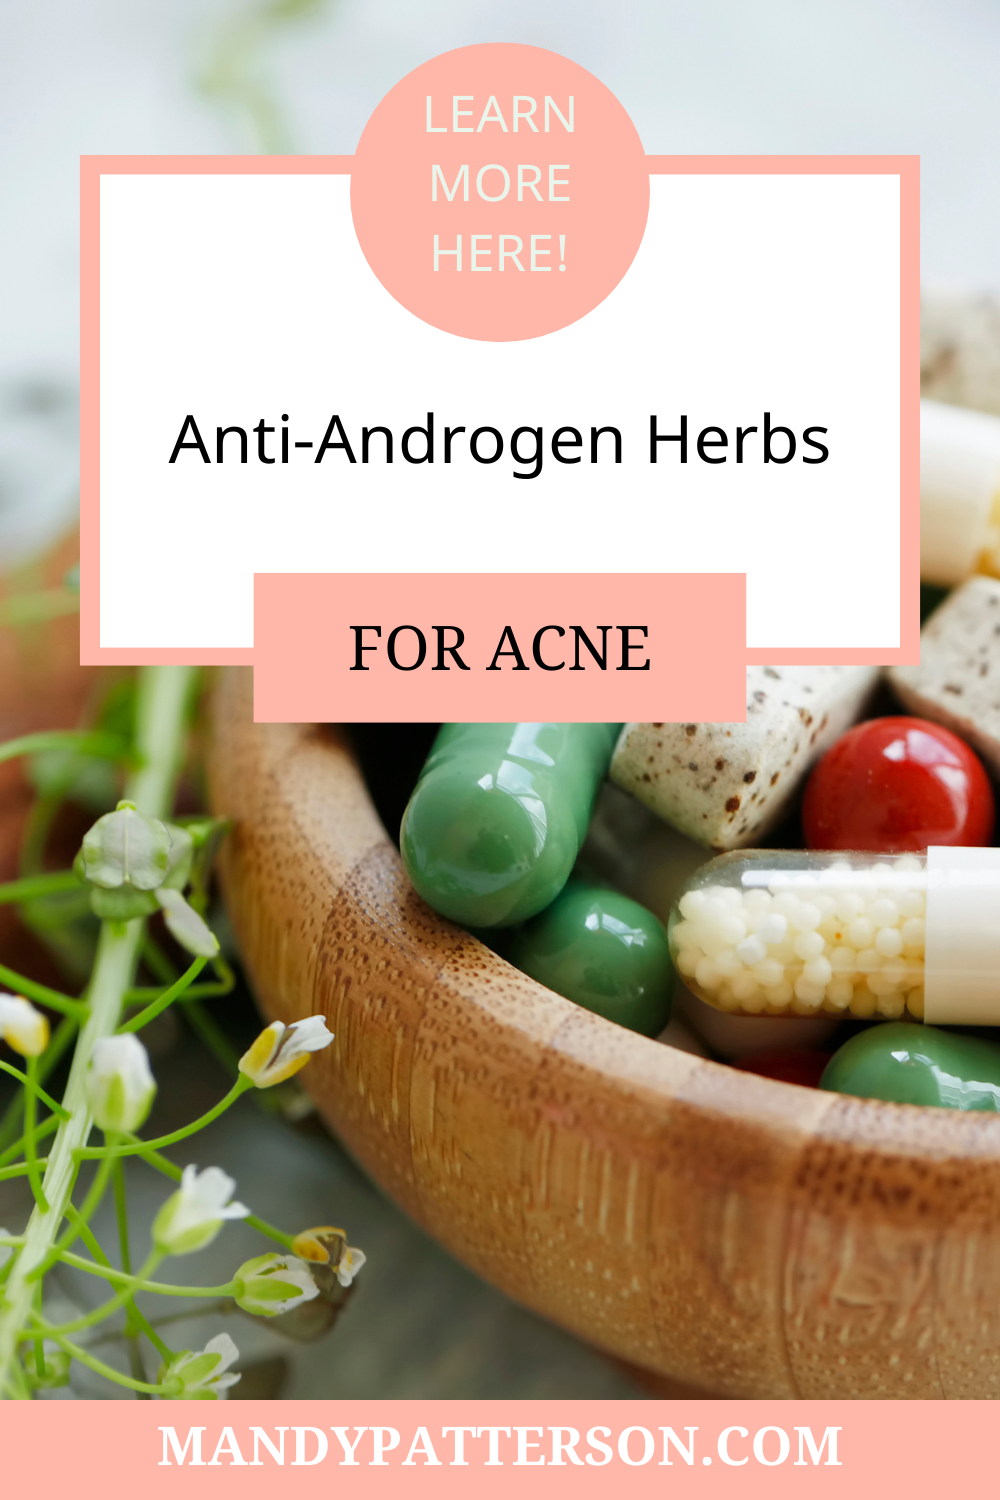 Anti-Androgen Herbs for Acne